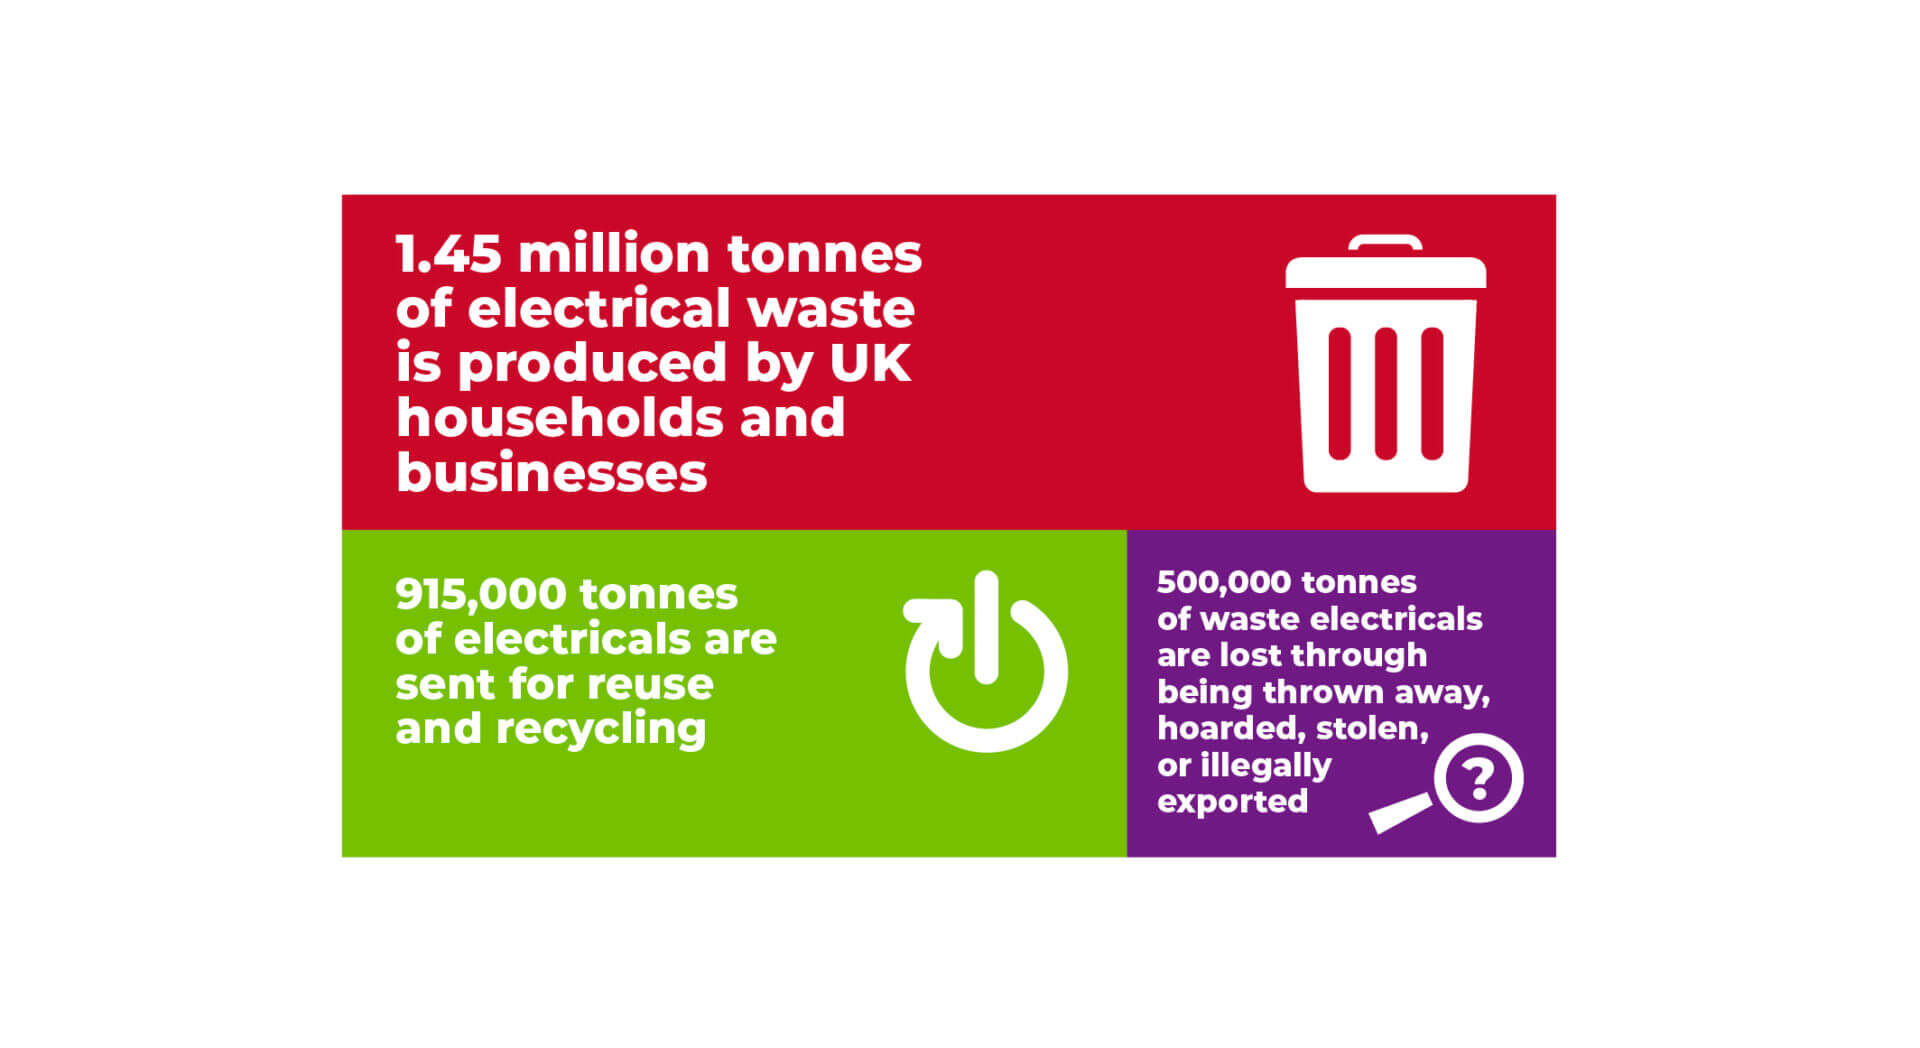 Graphic split into three - top half in red with a dustbin graphic reads: 1.45 million tonnes of electrical waste is produced by UK households and businesses. Bottom left in green with RYE logo reads: 915,000 tonnes of electricals are sent for reuse and recycling. Bottom right in purple with magnifying glass graphic reads: 500,000 tonnes of waste electricals are lost through being thrown away, hoarded, stolen, or illegally exported